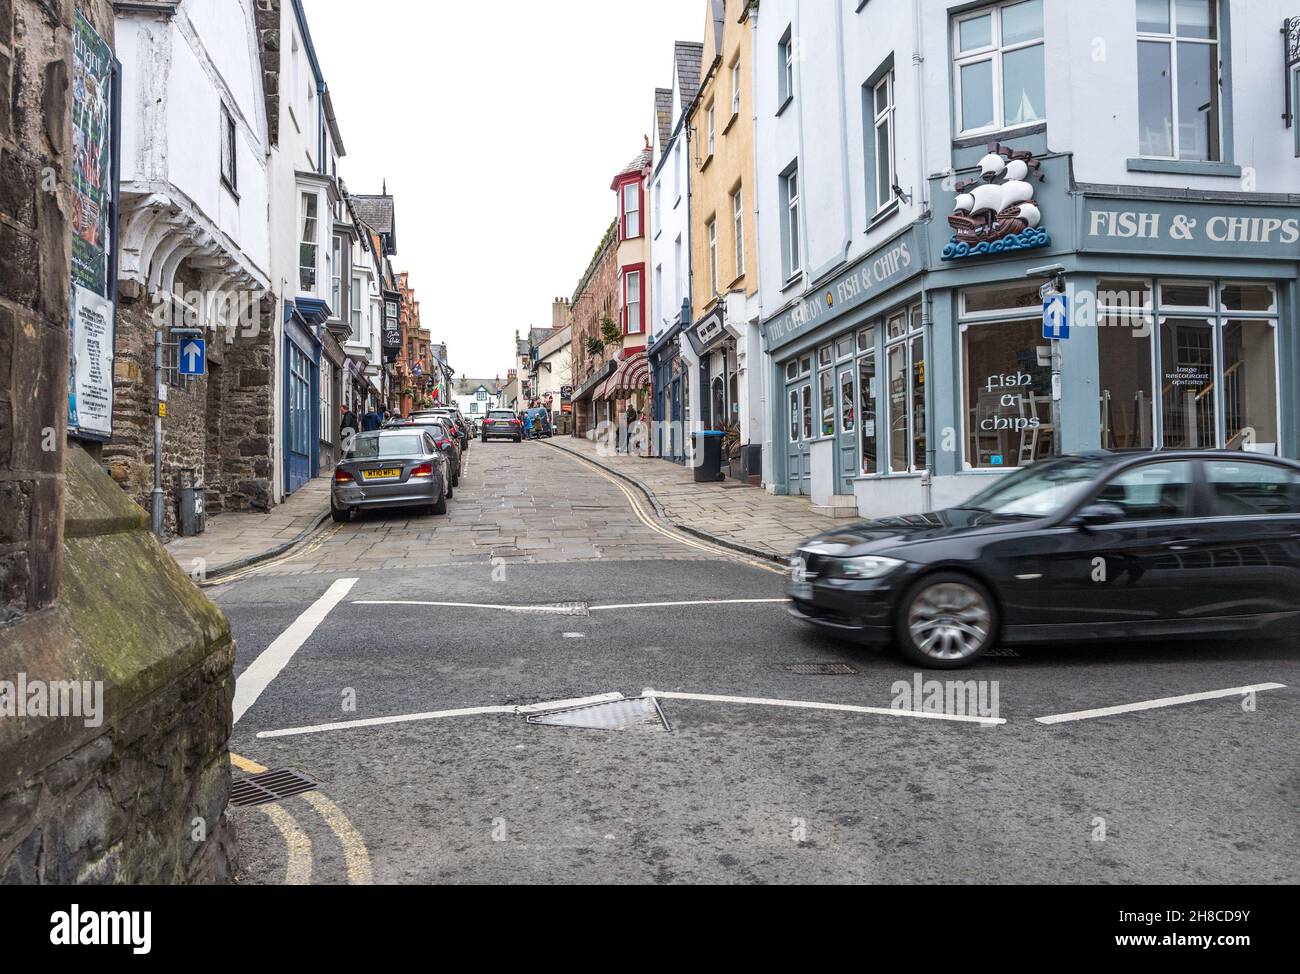 Parking along High street in the Stock Photo